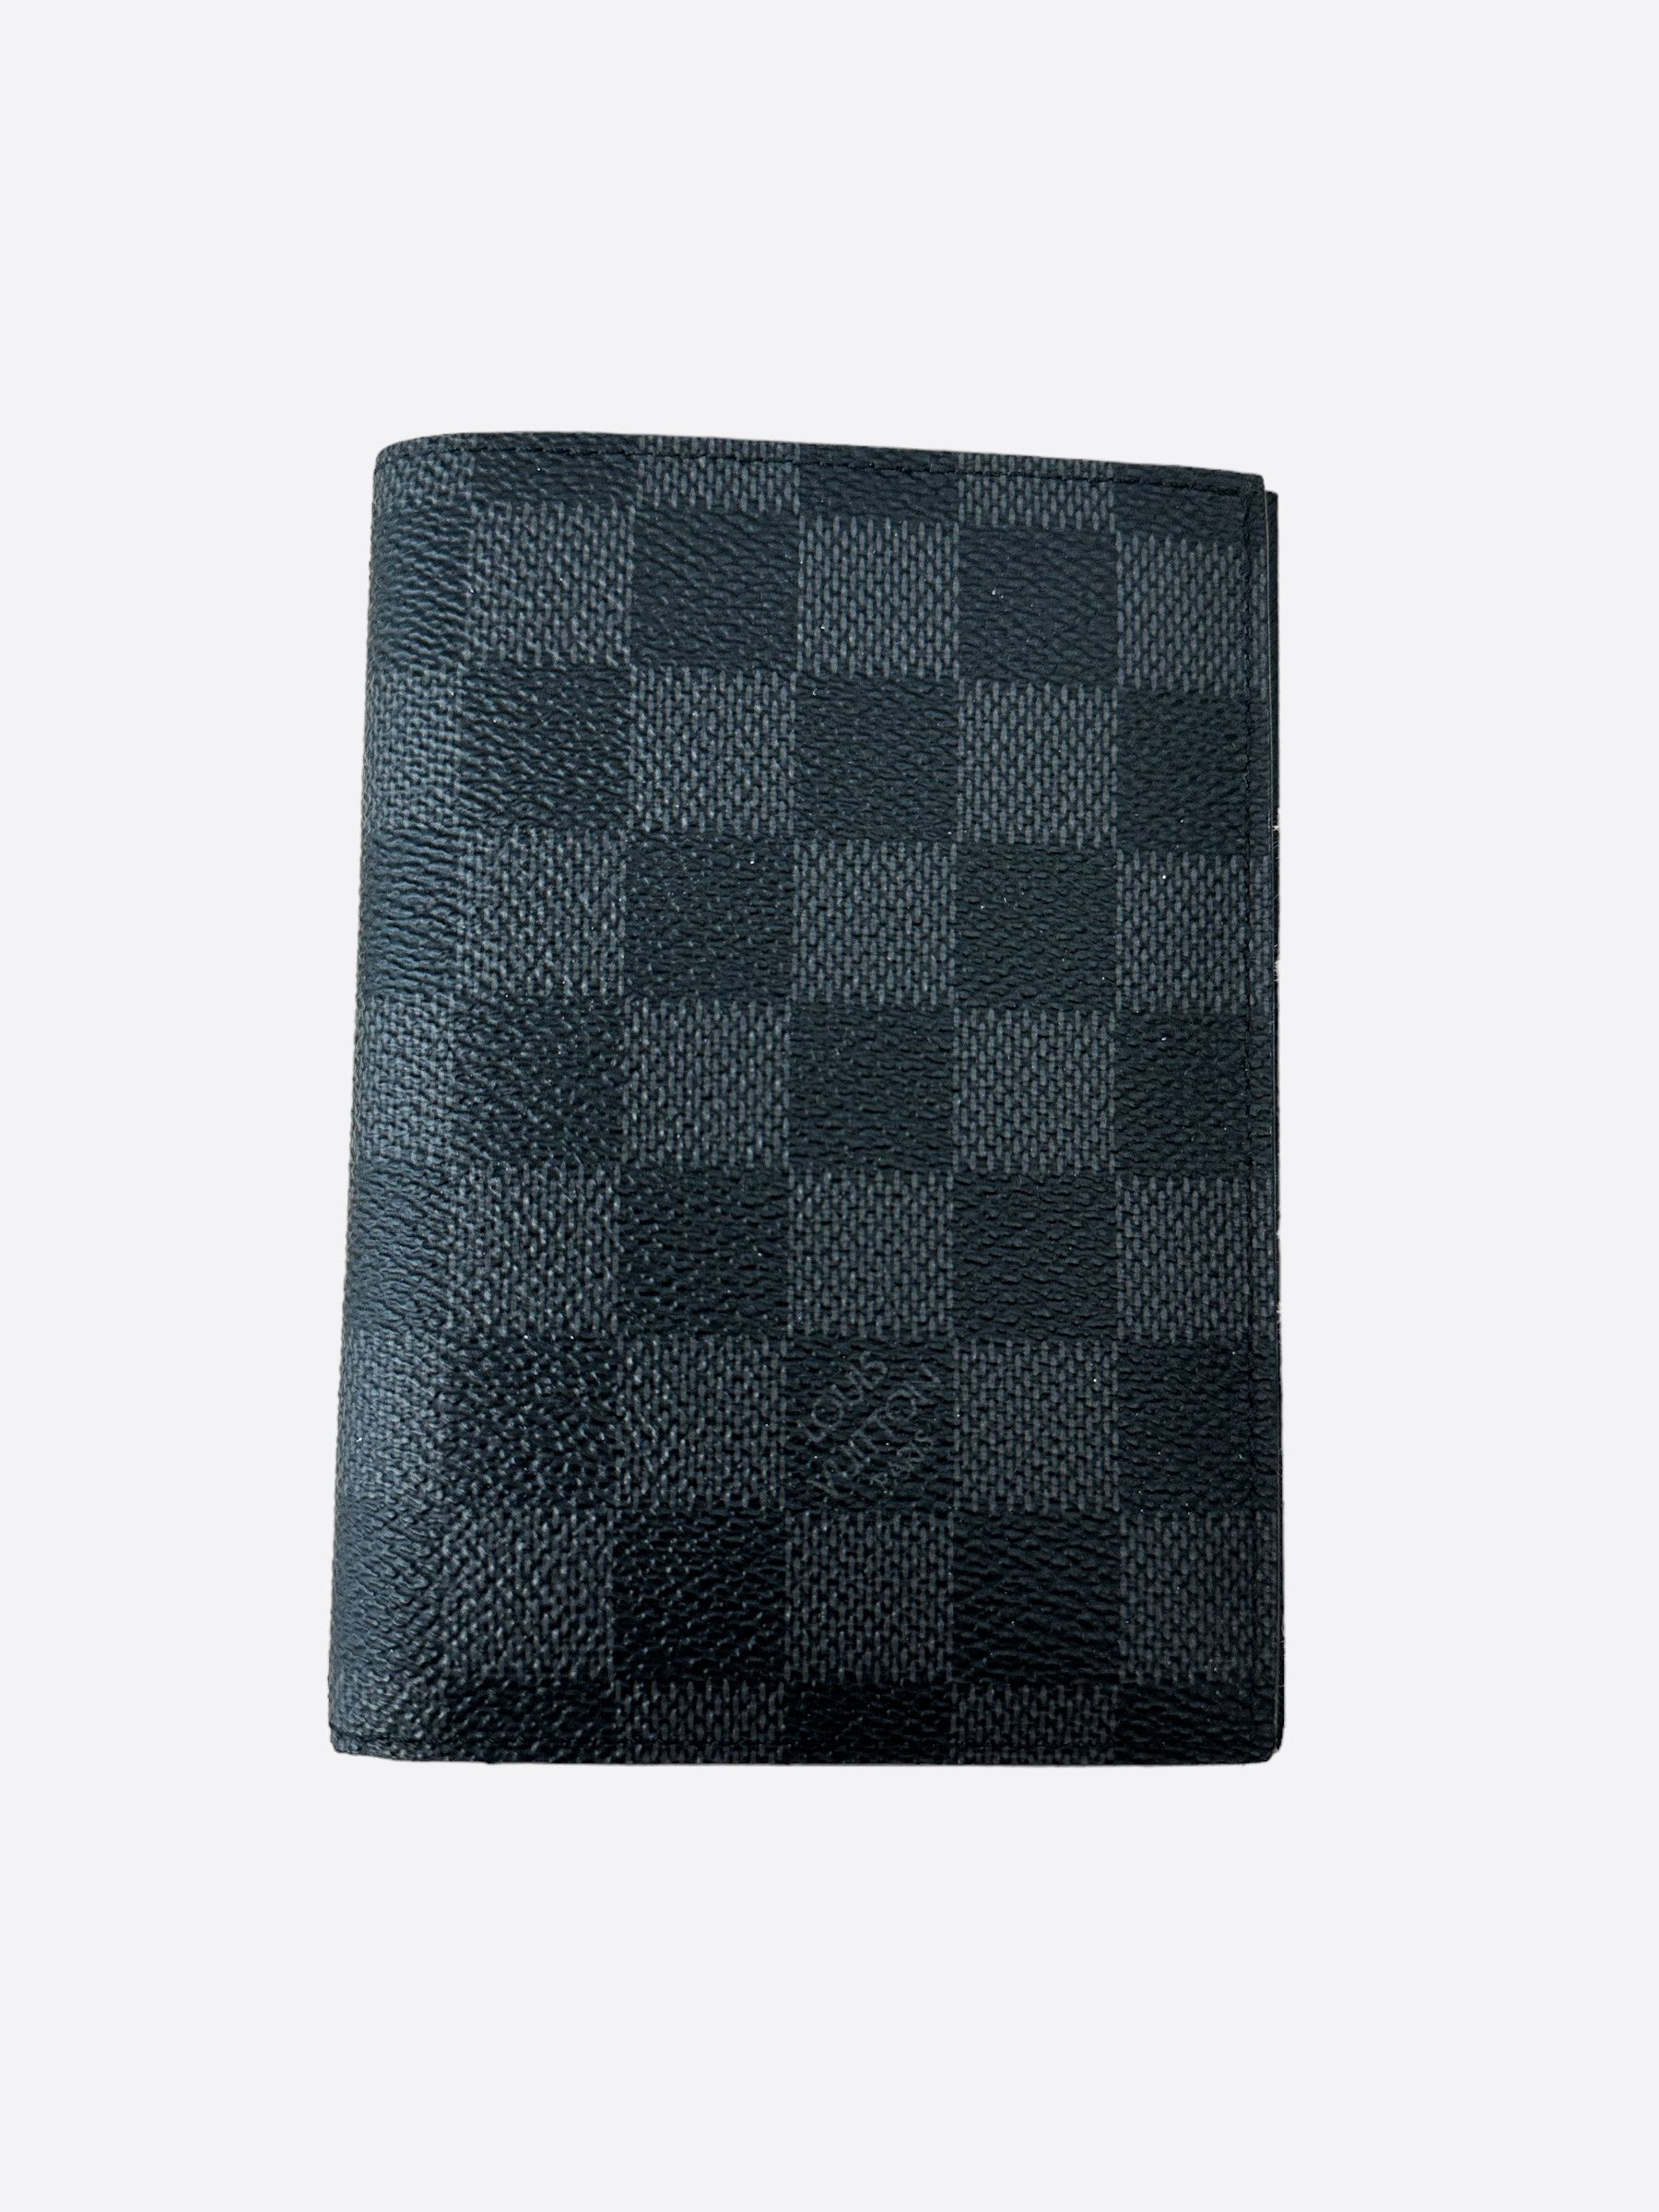 LOUIS VUITTON Damier Graphite Stamps Passport Cover Olive 1046709